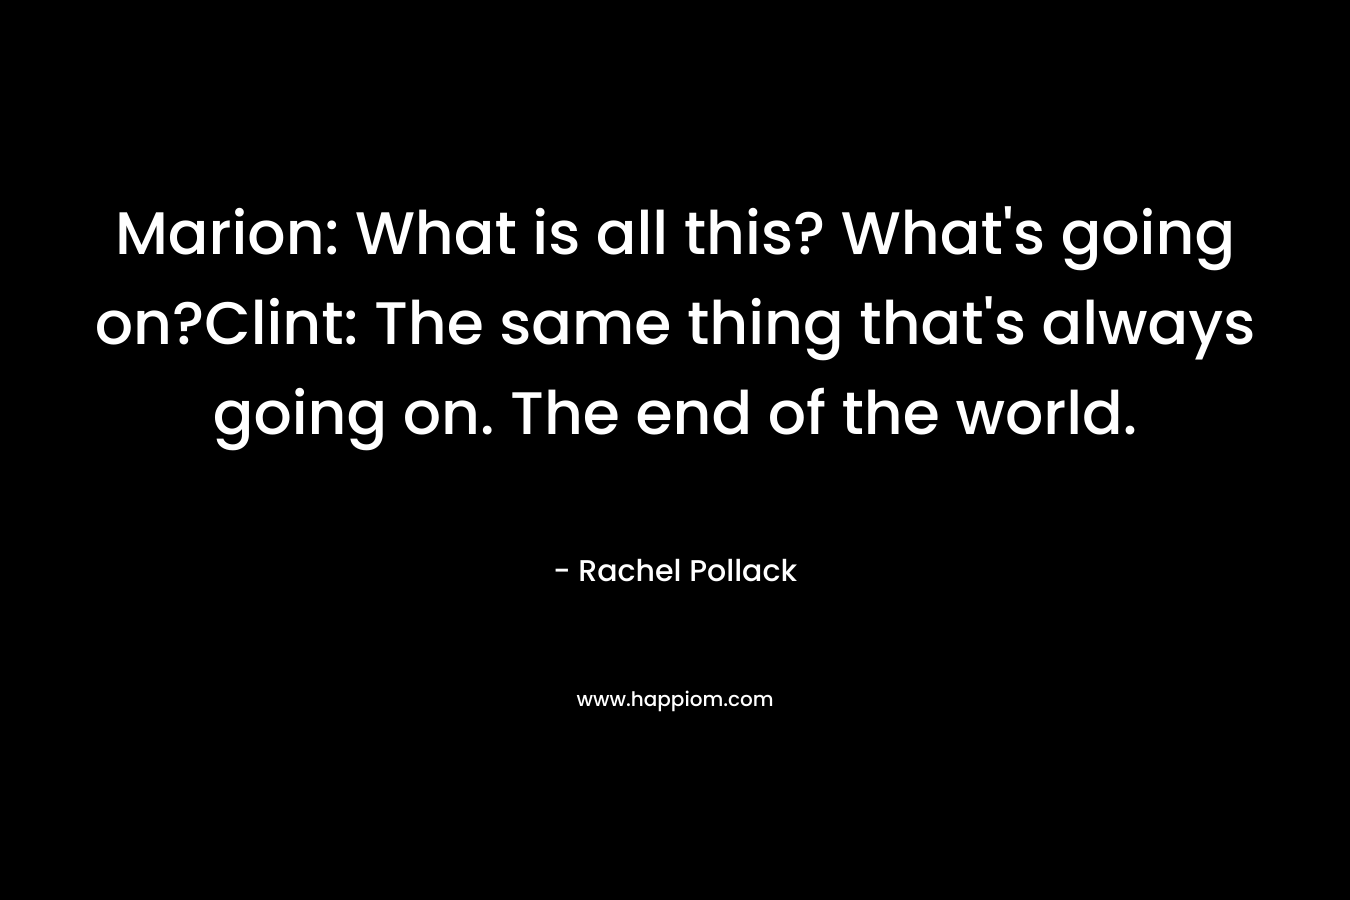 Marion: What is all this? What’s going on?Clint: The same thing that’s always going on. The end of the world. – Rachel Pollack